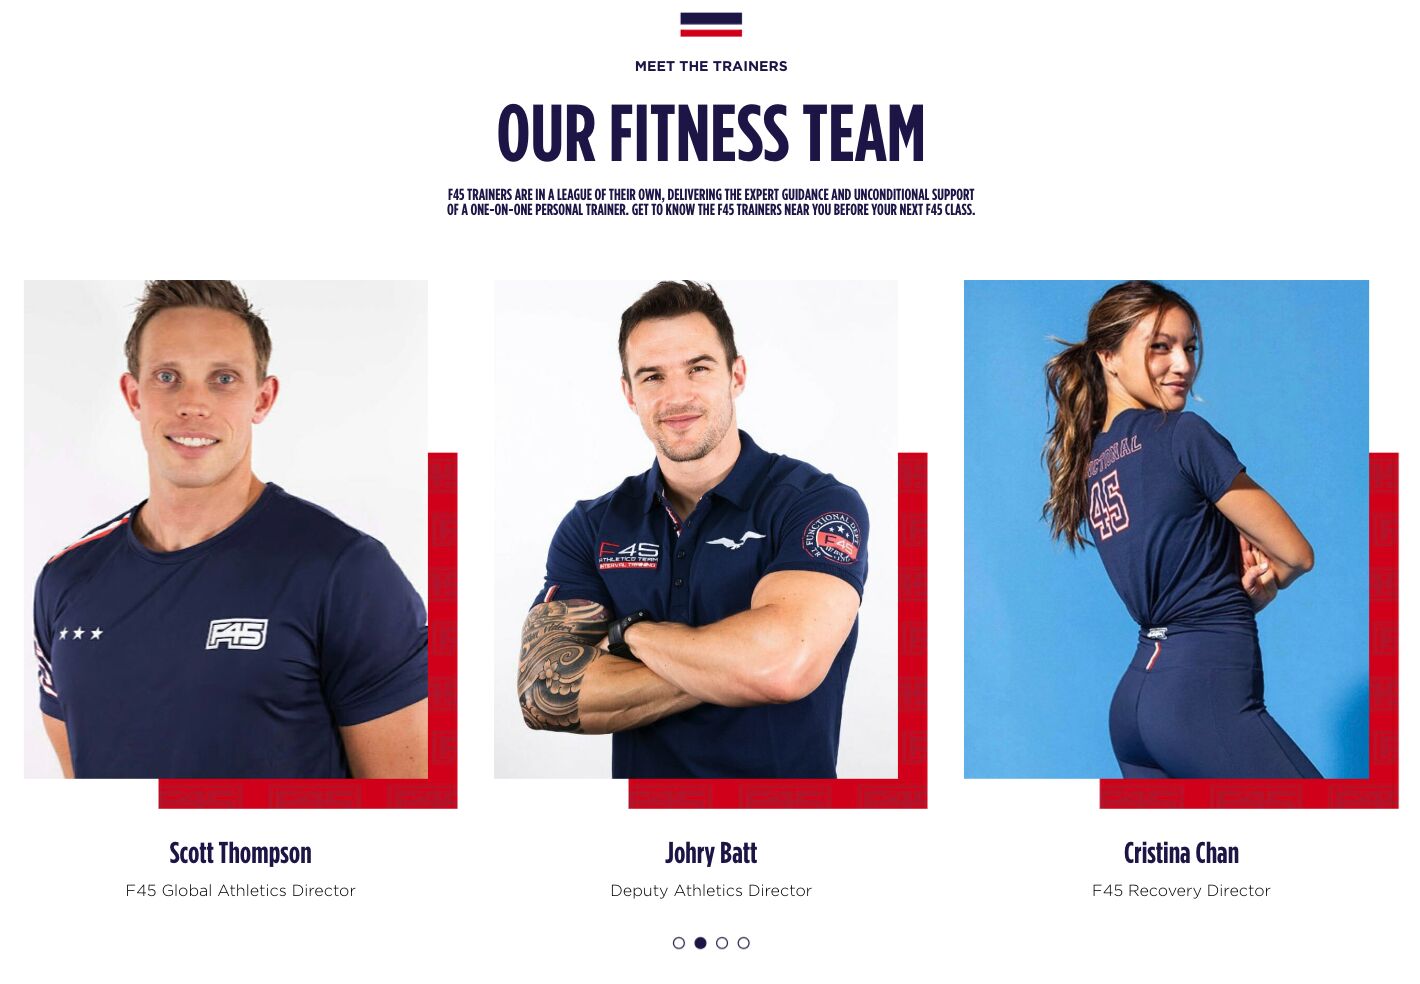 F45's team at the Pooler location